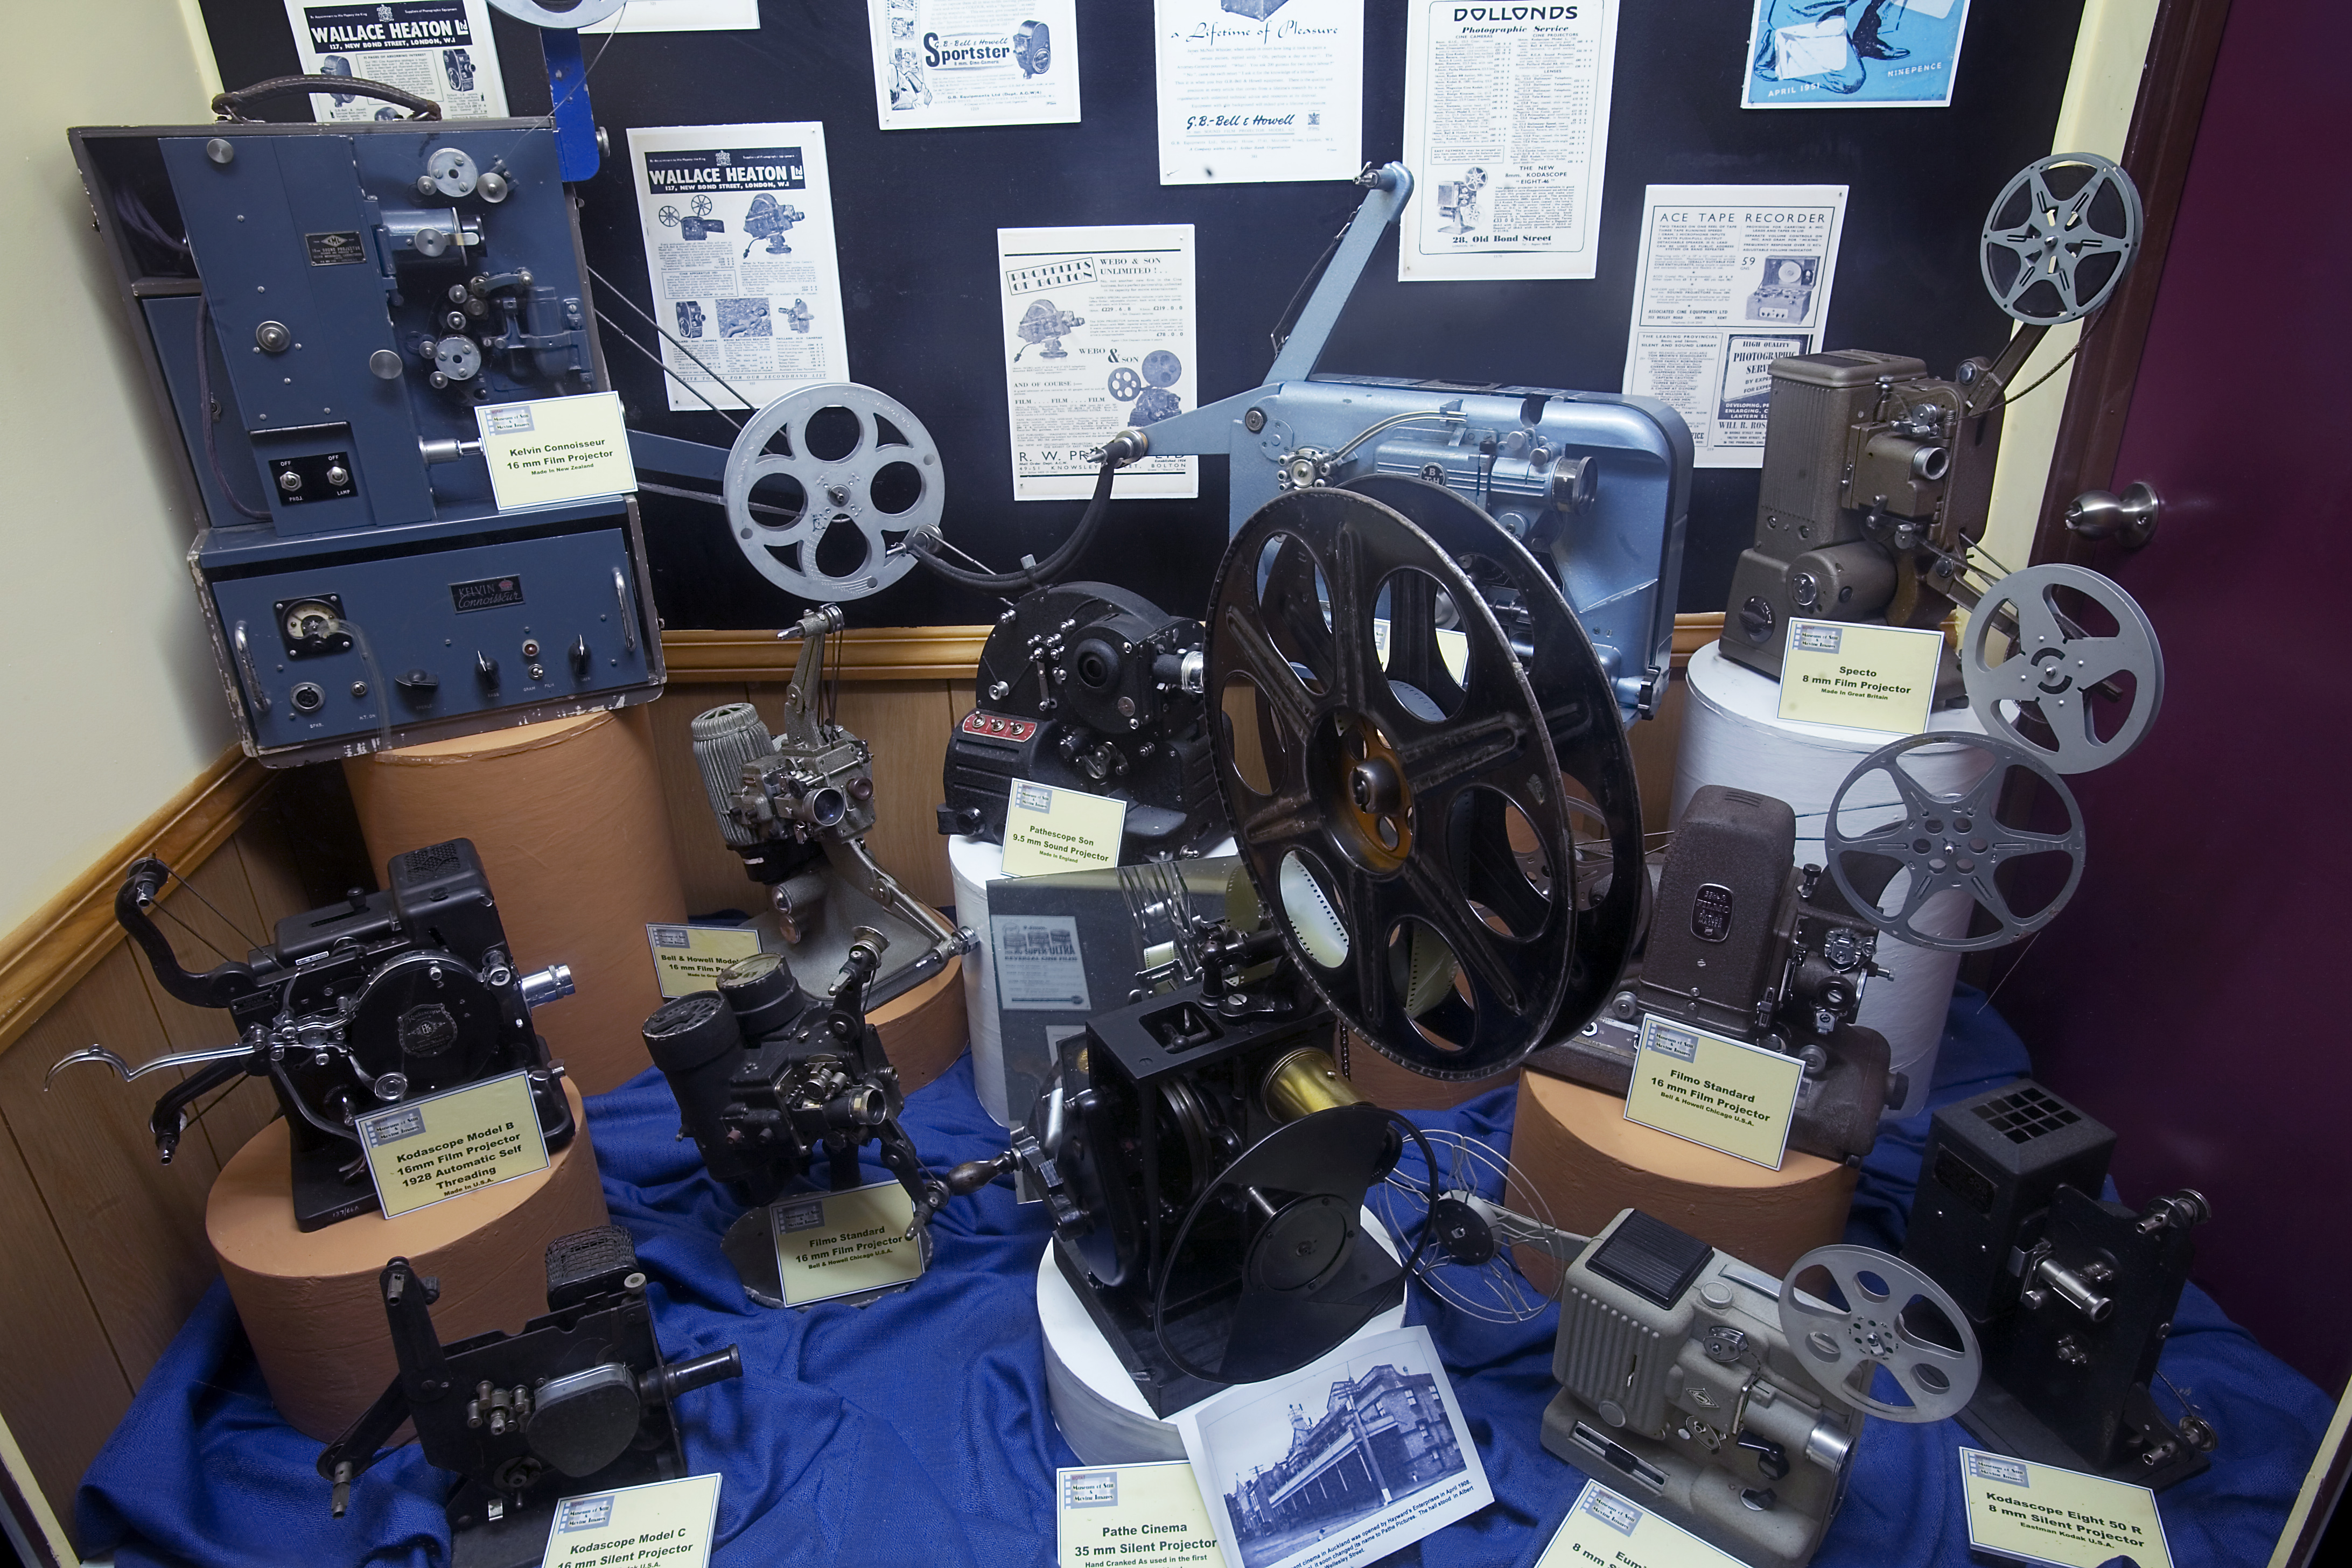 File:A display full of vintage film projectors and film